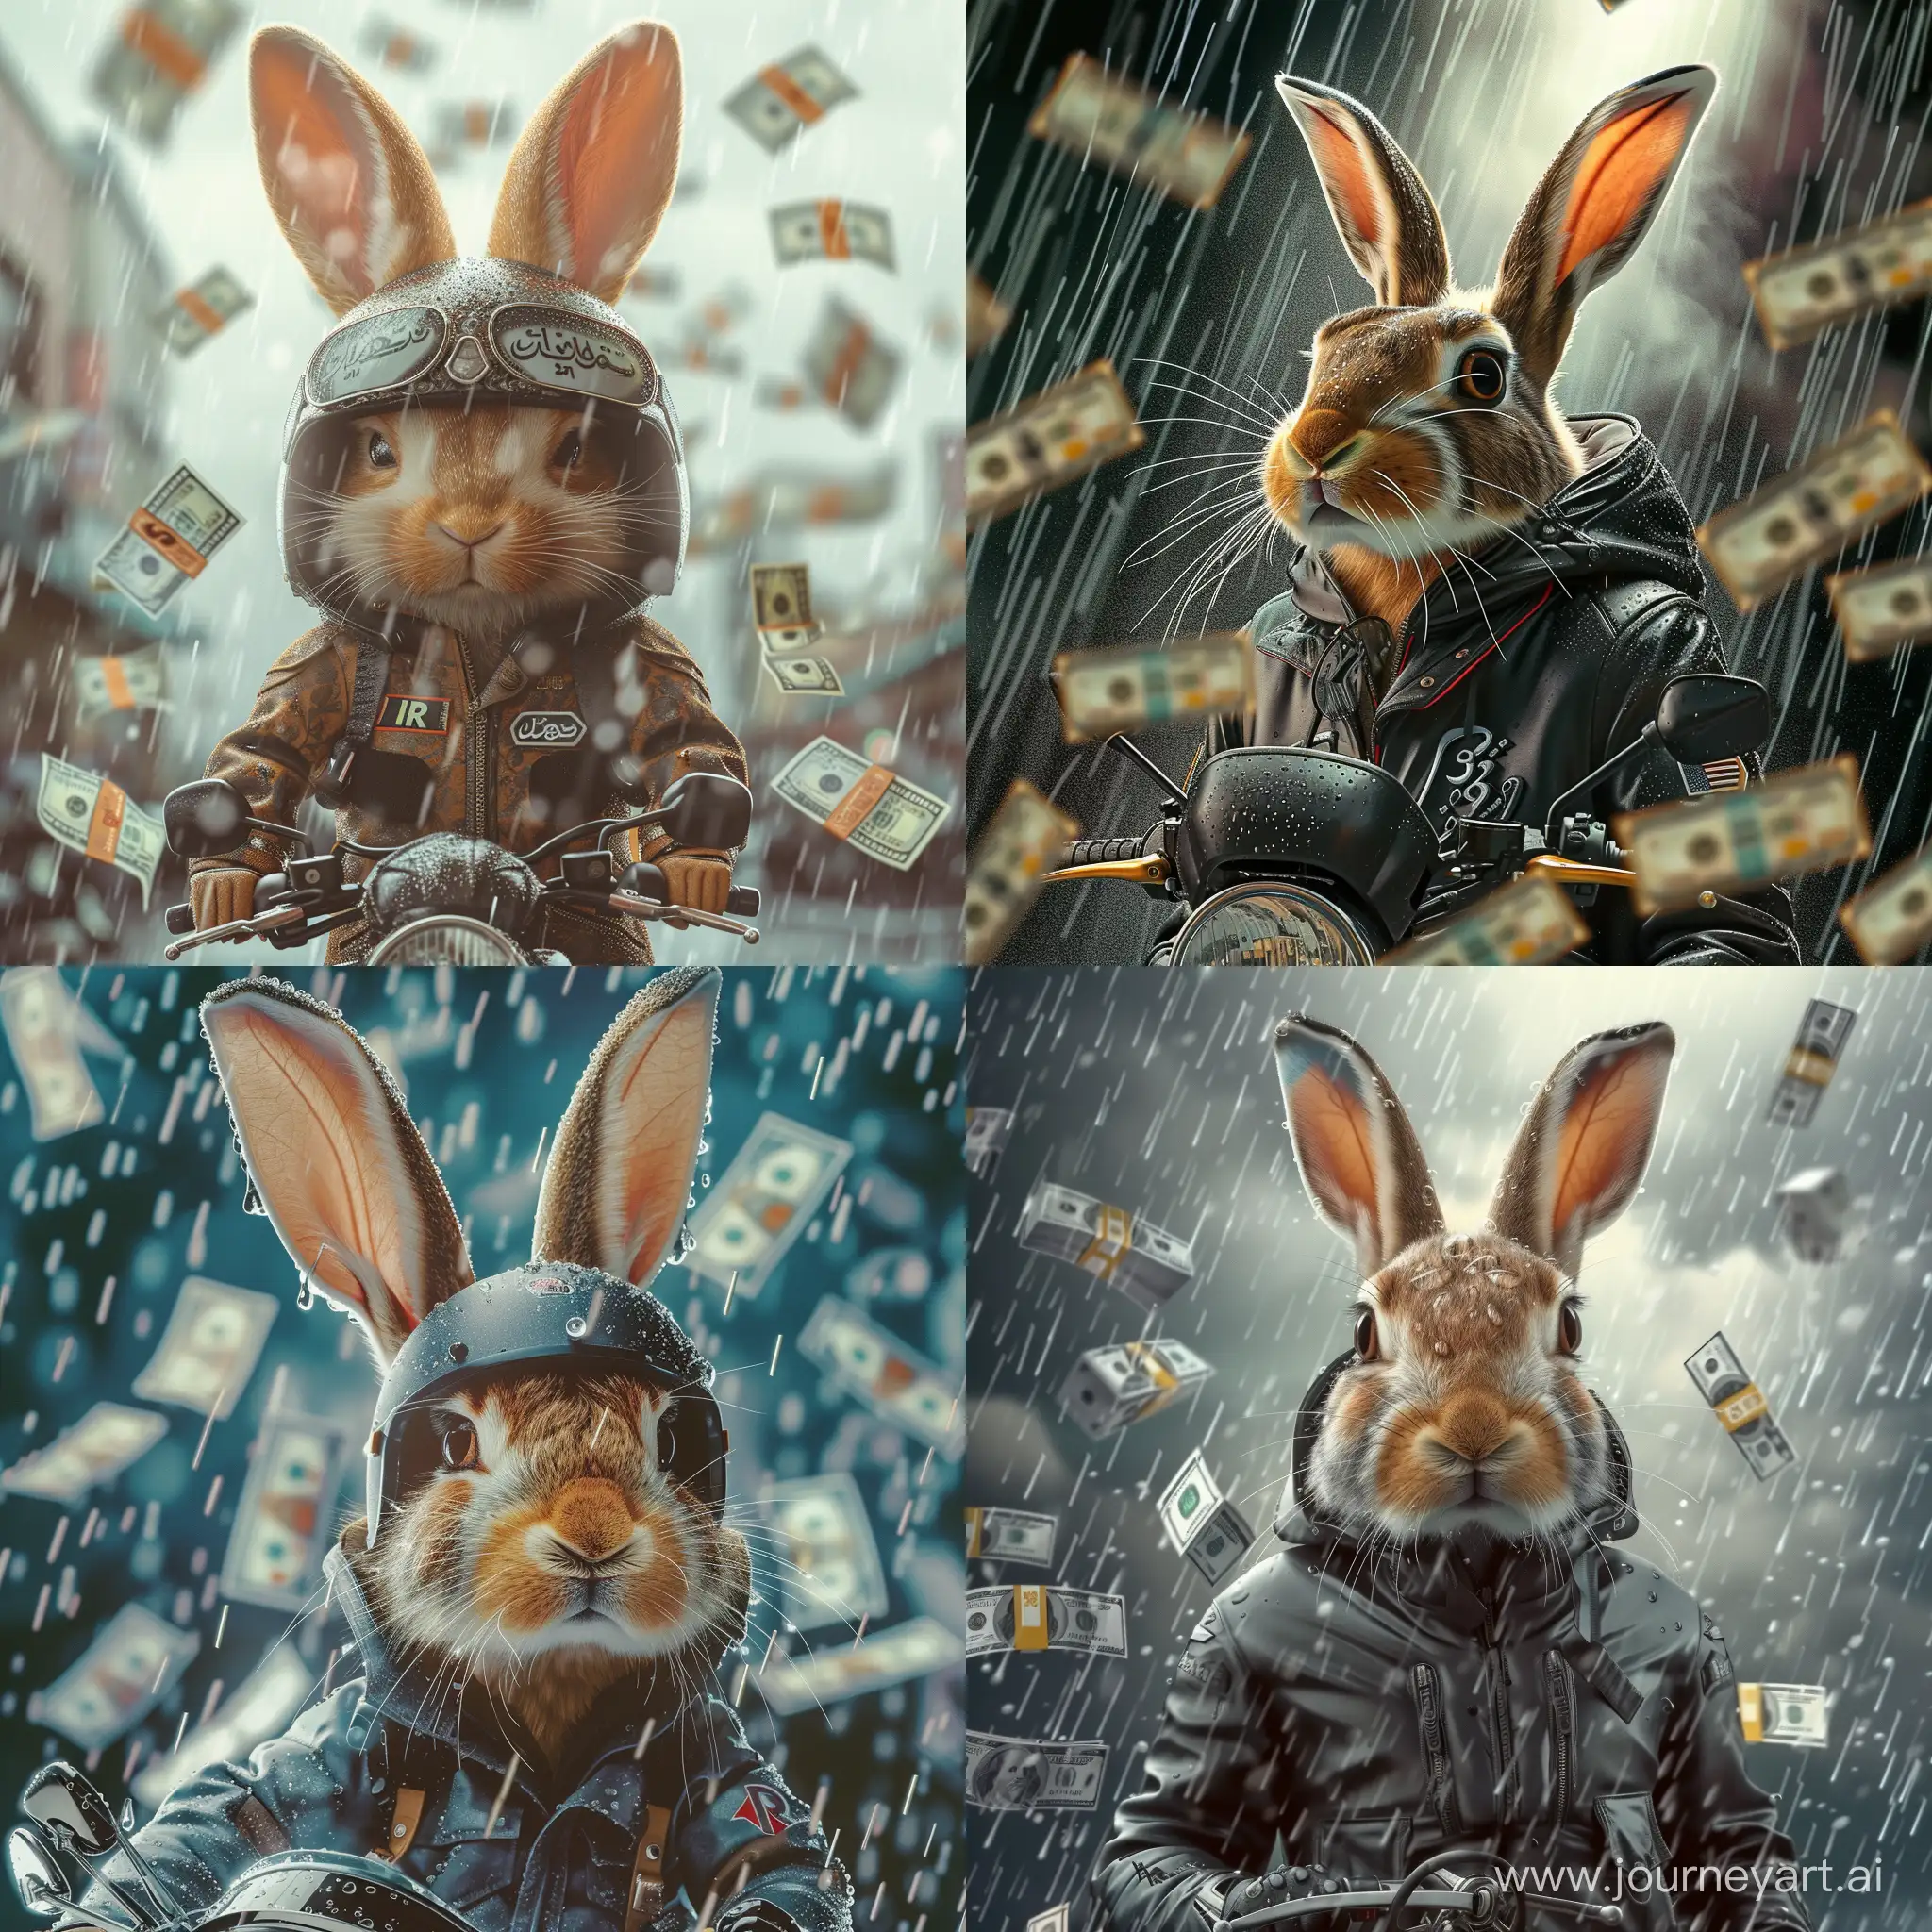 a cute and appealing hare wearing a motorcyclist outfit in the rain, surrounded by Rial cash prizes from a lottery